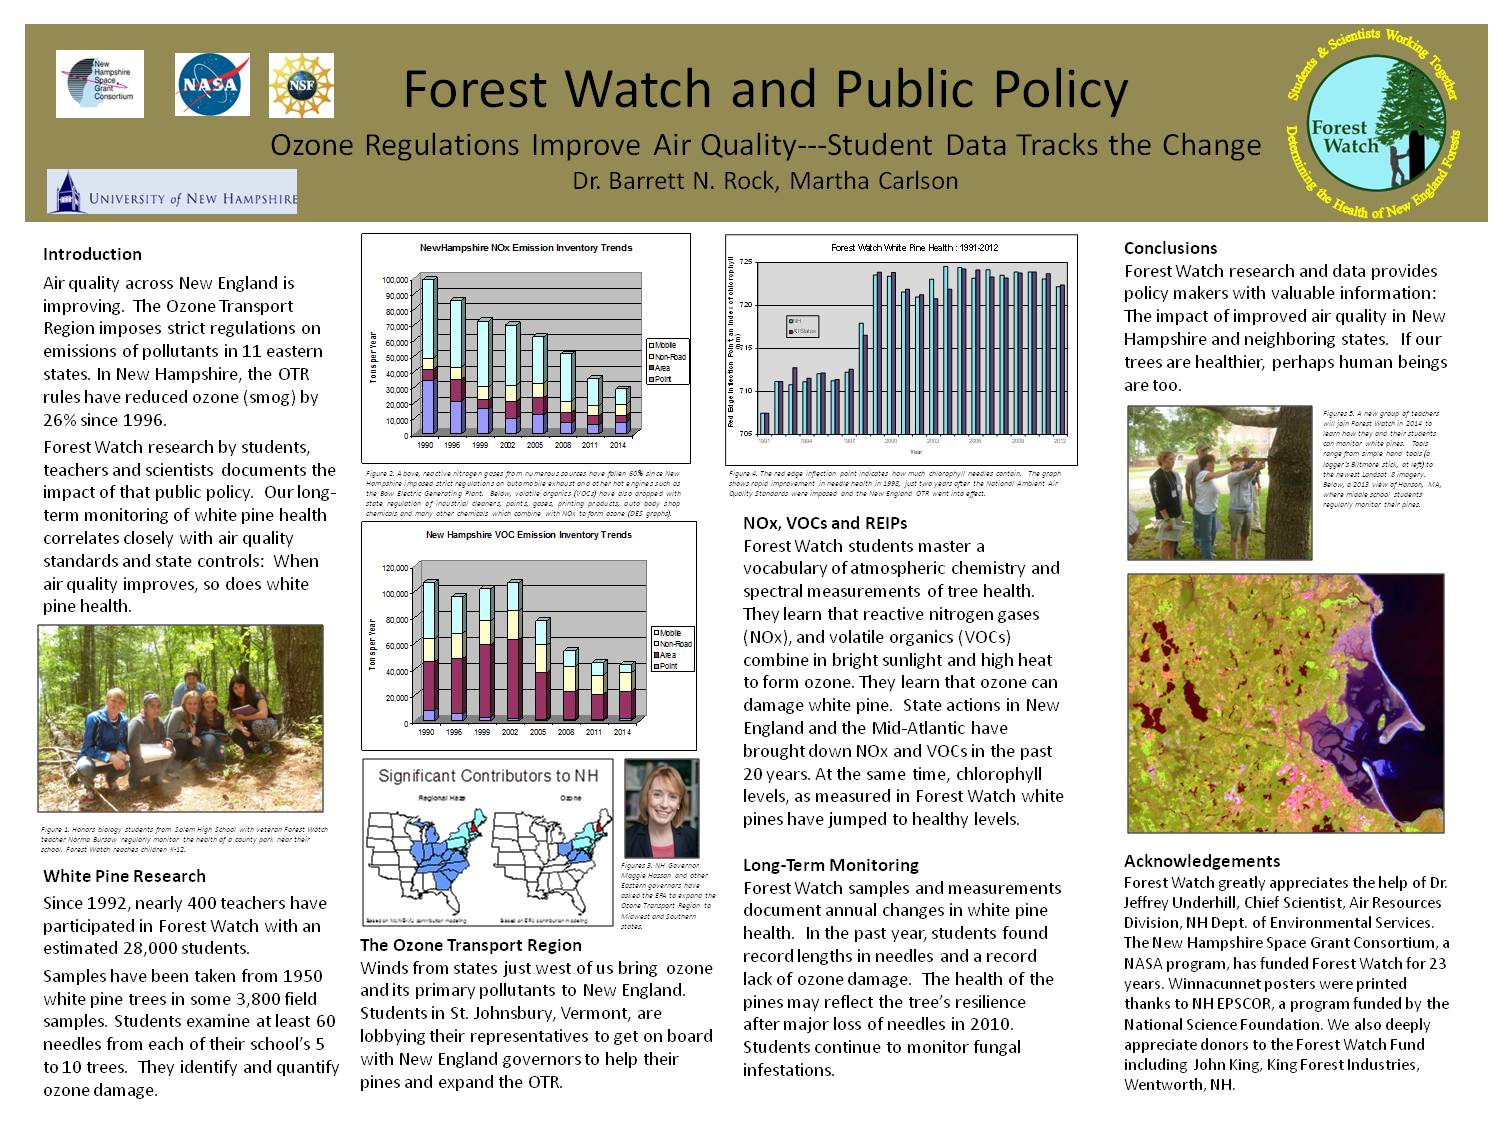 Forest Watch And Public Policy by mrg39